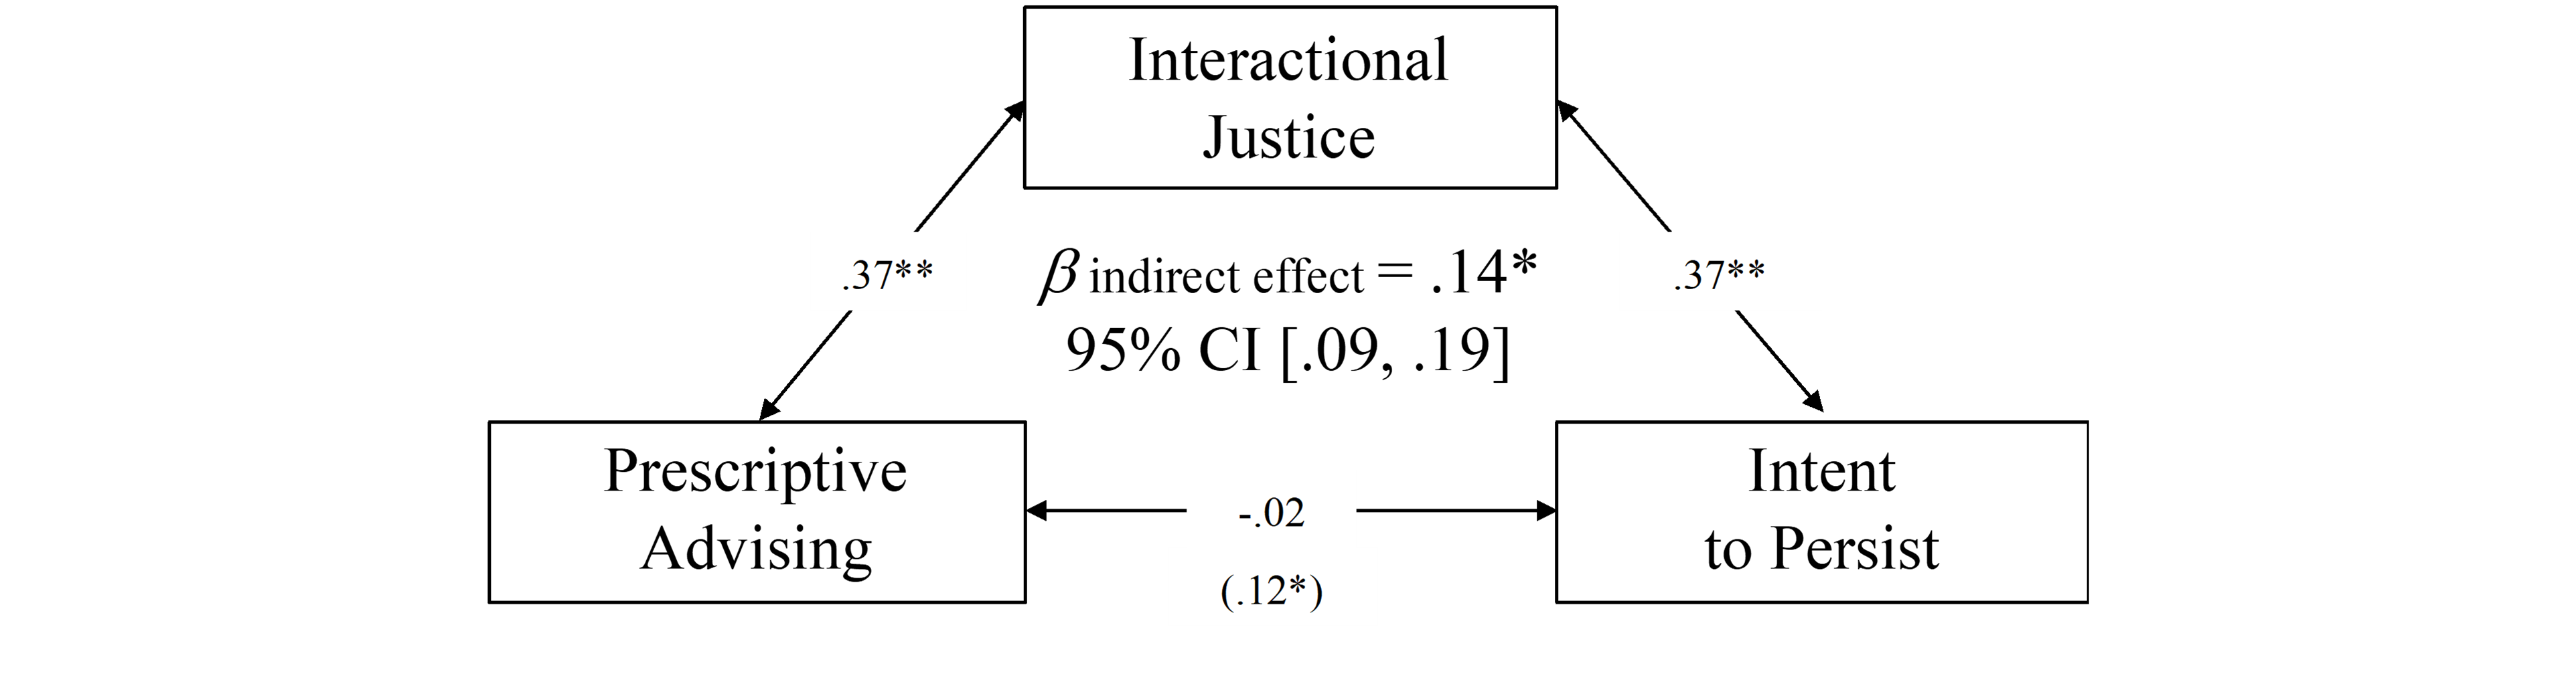 Three rectangle boxes arranged in a triangle with the following written in between the boxes: beta; indirect effect = .14*, 95% CI [.09, .19]. The top box says Interactional Justice and connects to the bottom left box, which says Prescriptive Advising, with a line and .37** written in the middle of the line. The top box also connects to the bottom right box, which says Intent to Persist, with a line and .37**. The bottom boxes connect to each other with a line and -.02 (.12*).